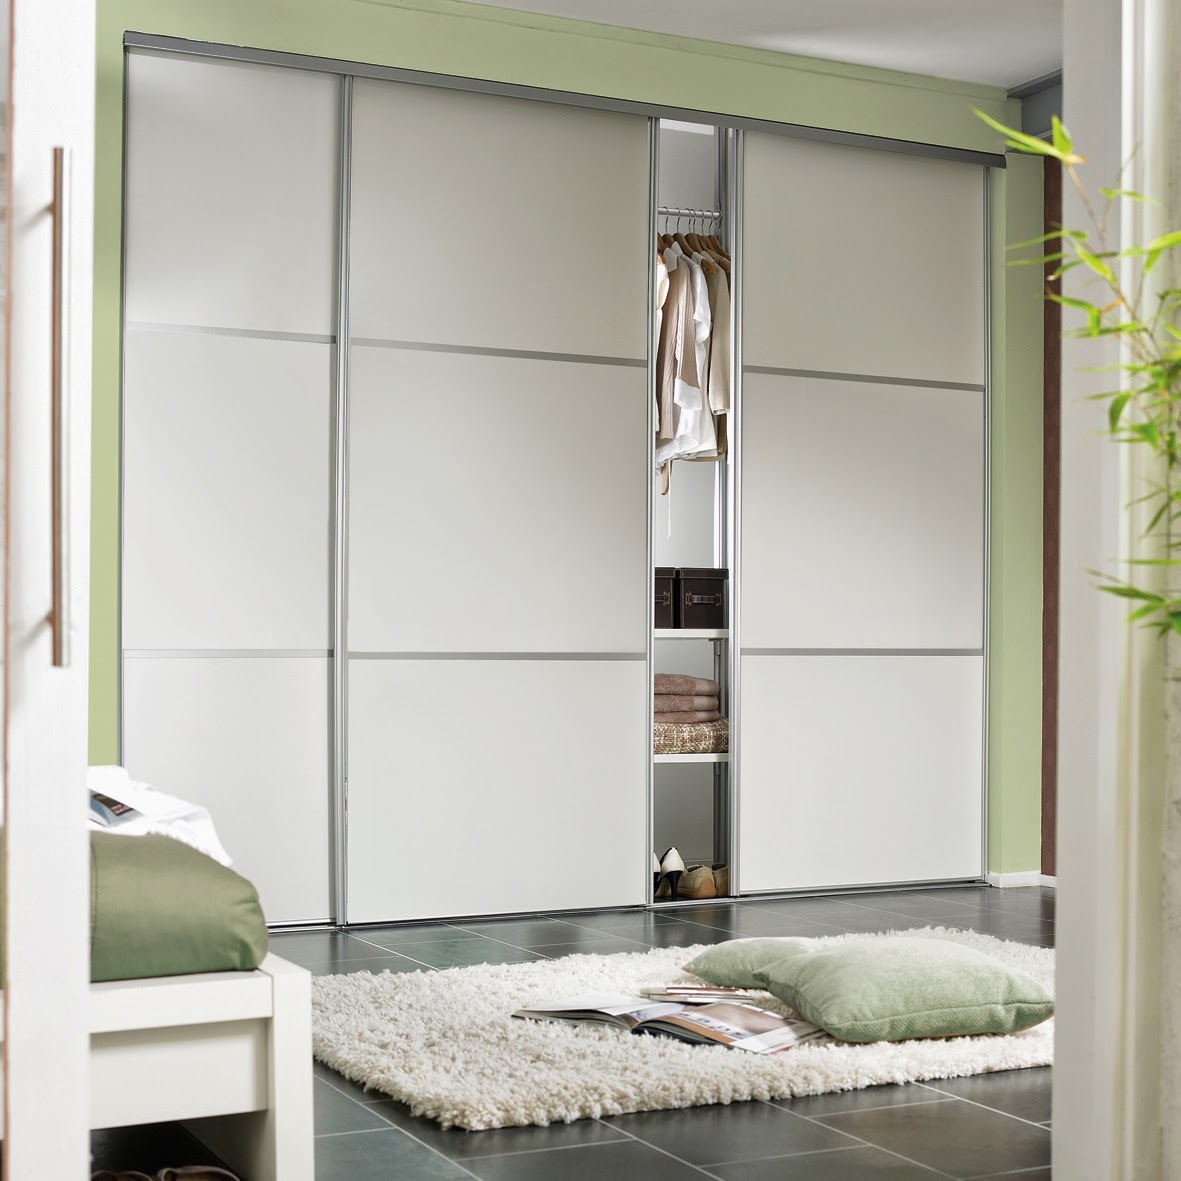 Bedrooms Plus Sliding Wardrobe Doors and Fittings: How to ...